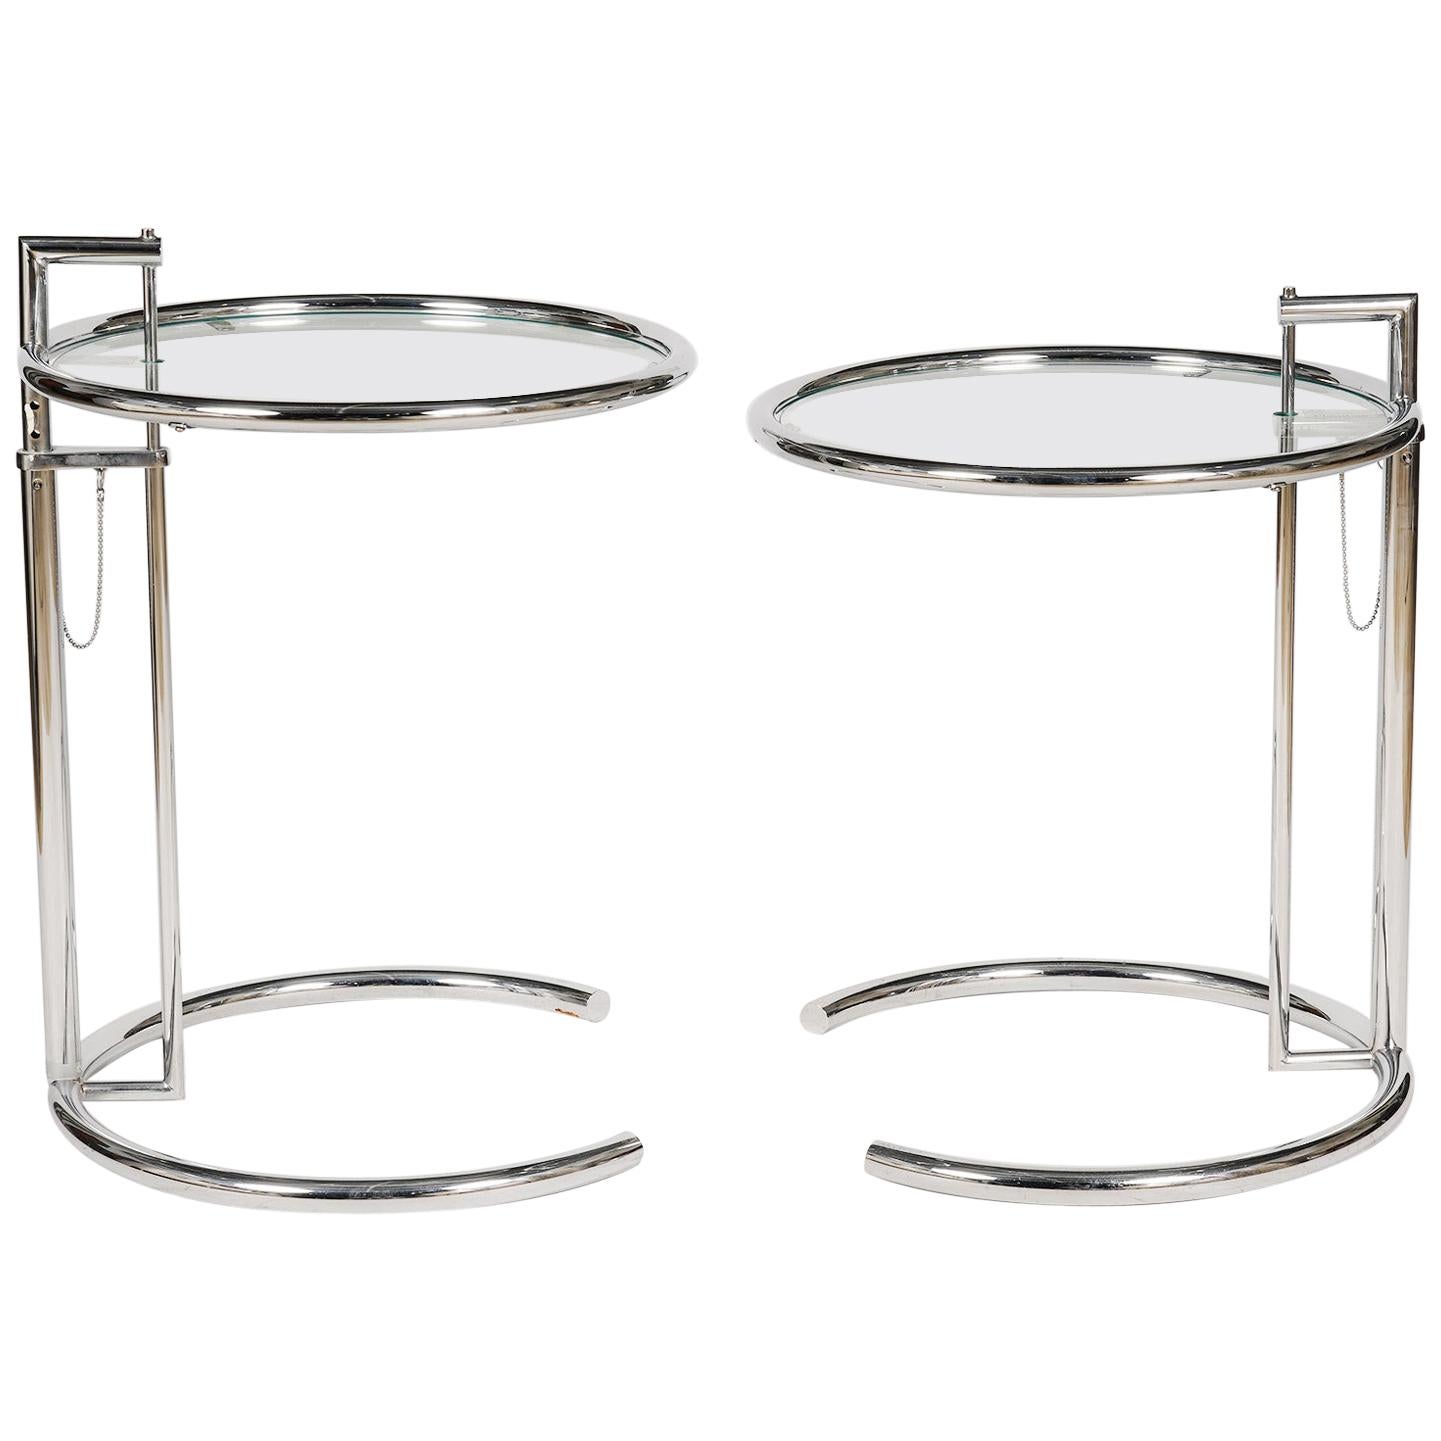 Pair of Iconic Eileen Gray E1027 Adjustable Round Chrome and Glass Side Tables